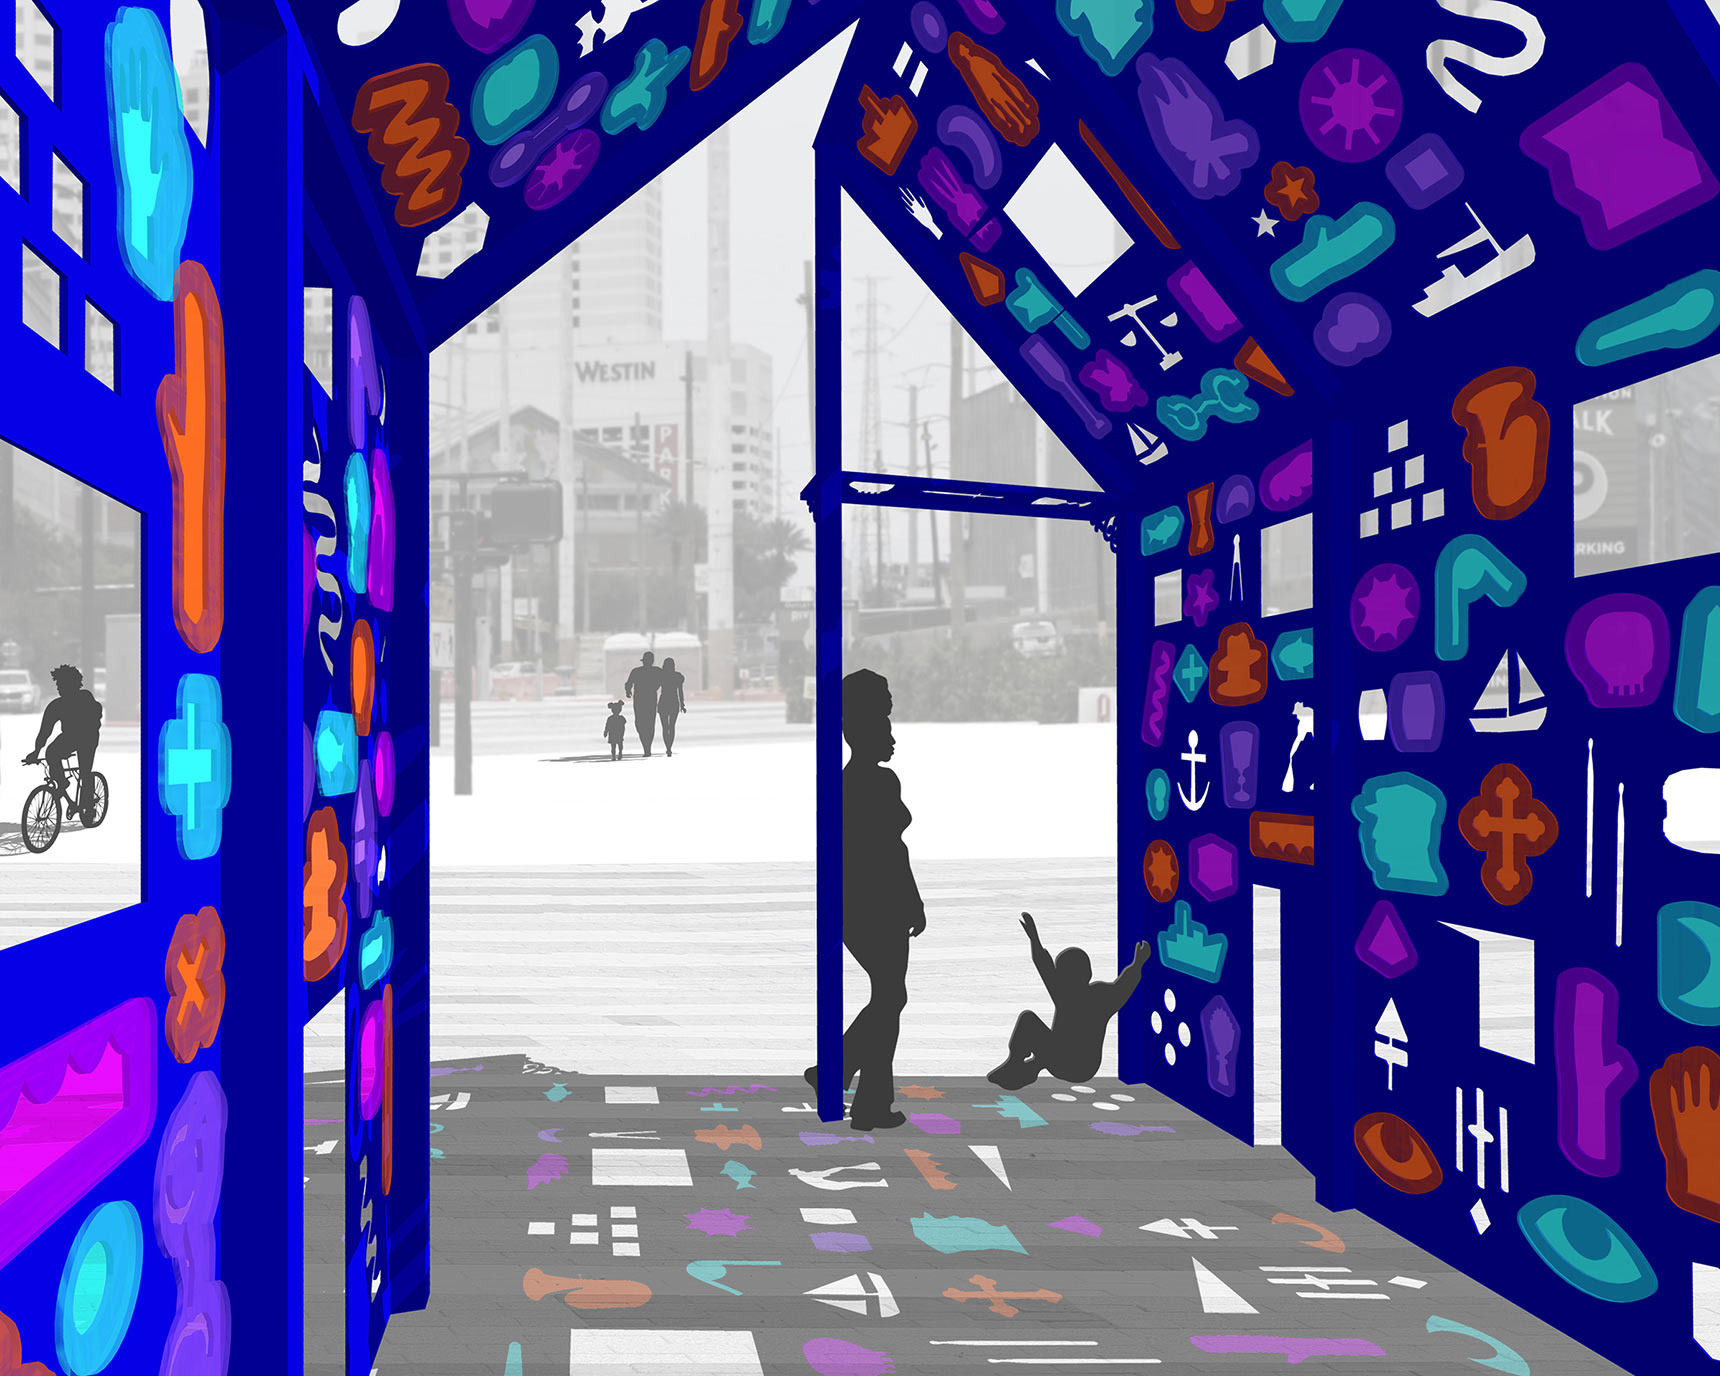 Hieroglyphic House, rendering of a proposed public art installation of a deep blue house-like structure with walls and roofs punctured by windows of shaped iconographic imagery in vibrant colors. Sunlight streaming through these openings casts colorful shadows on the ground.